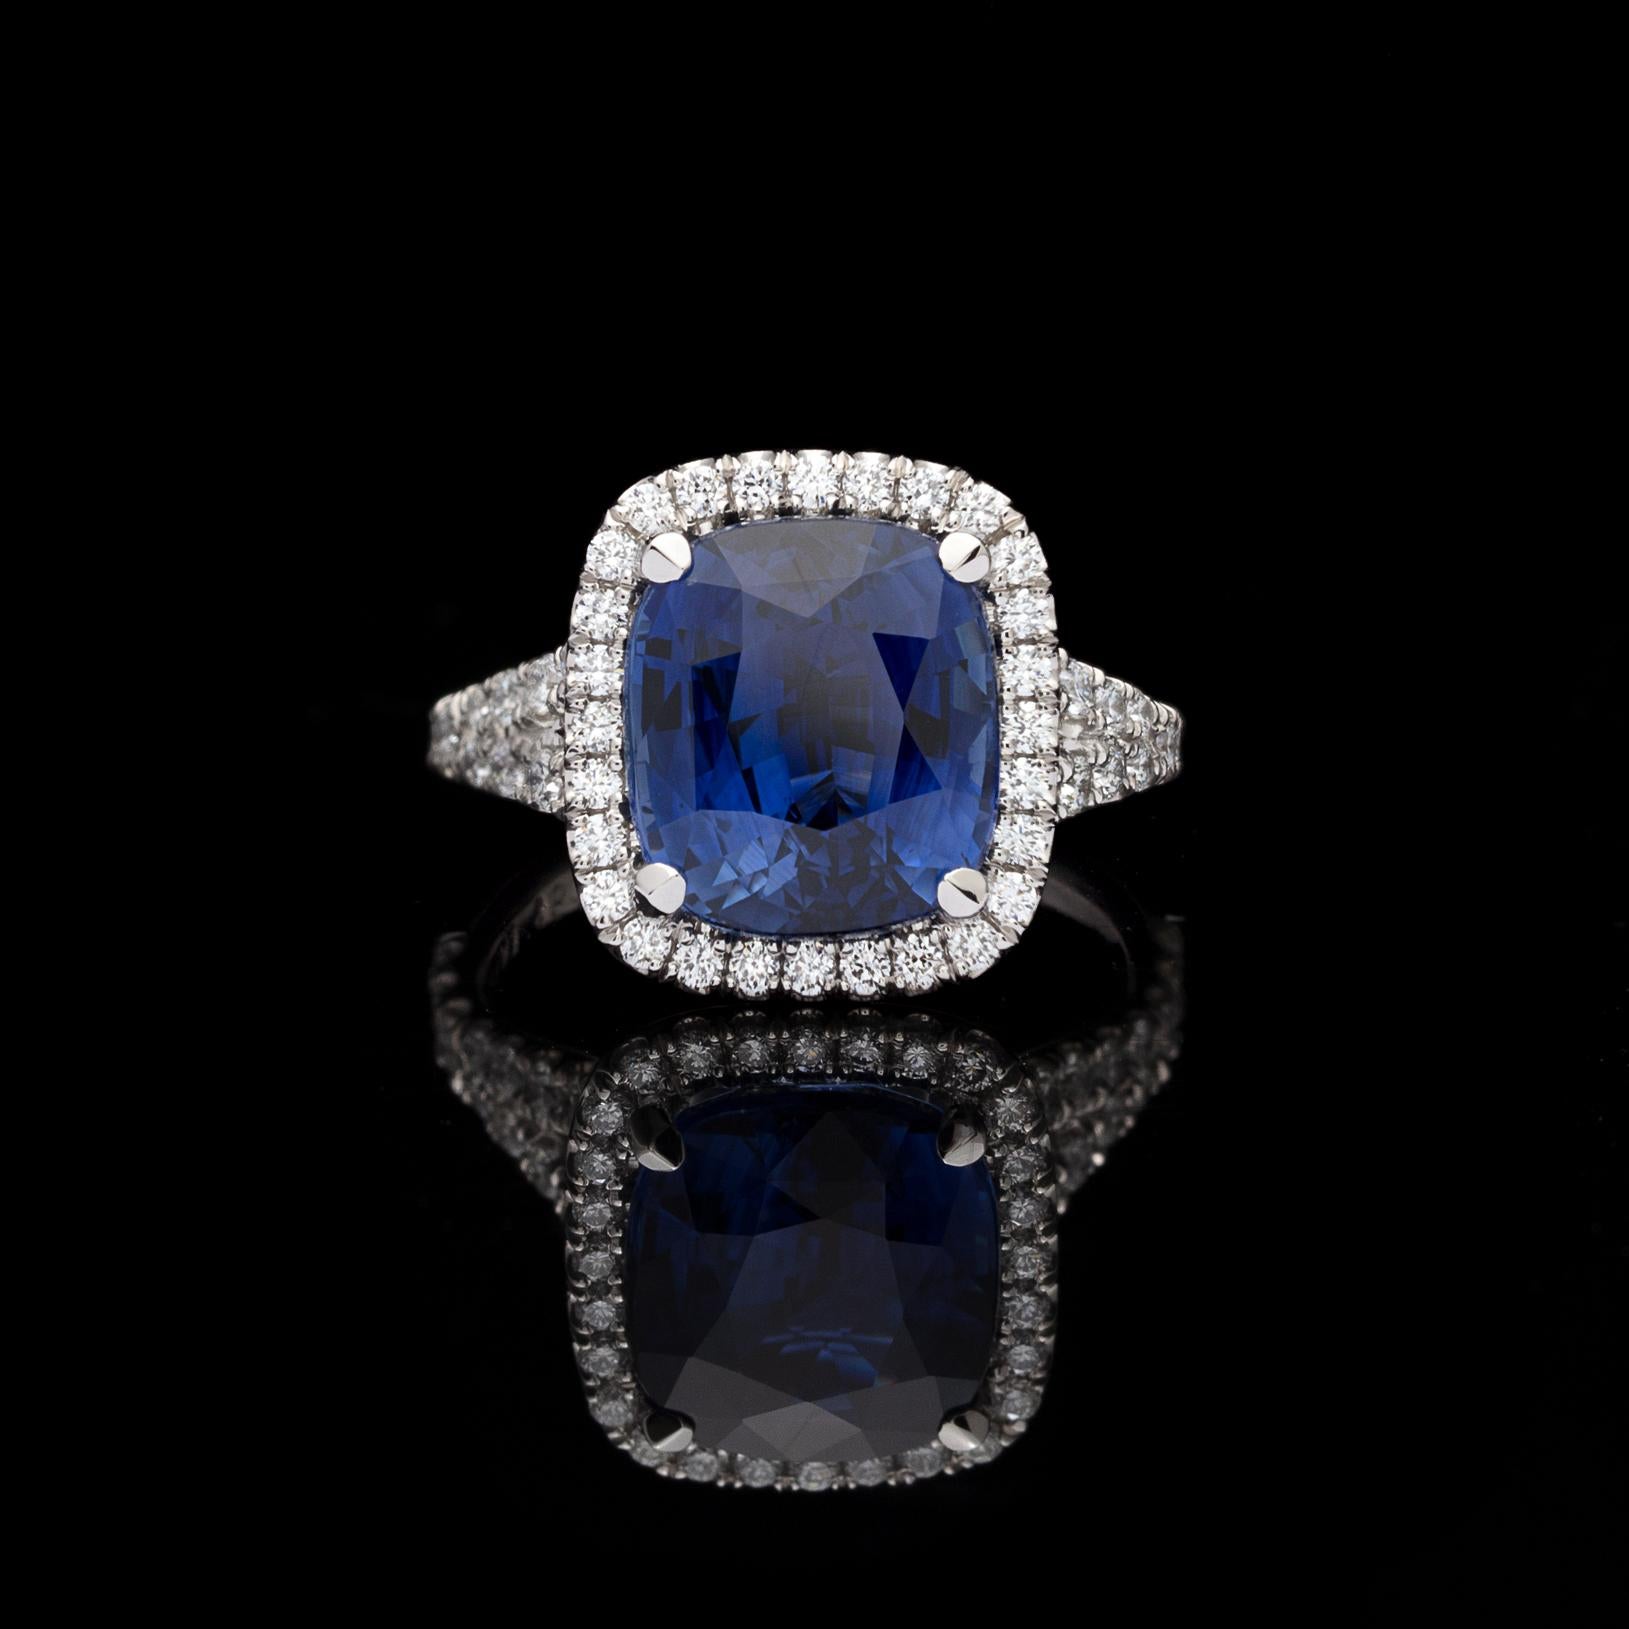 A gorgeous platinum ring boasting a rare unheated 7.06 carats cushion-cut blue sapphire, surrounded by a halo of brilliant-cut diamonds and diamond-set split shank, for a total diamond weight of 0.72 carat. The ring is currently size 6 1/4, with